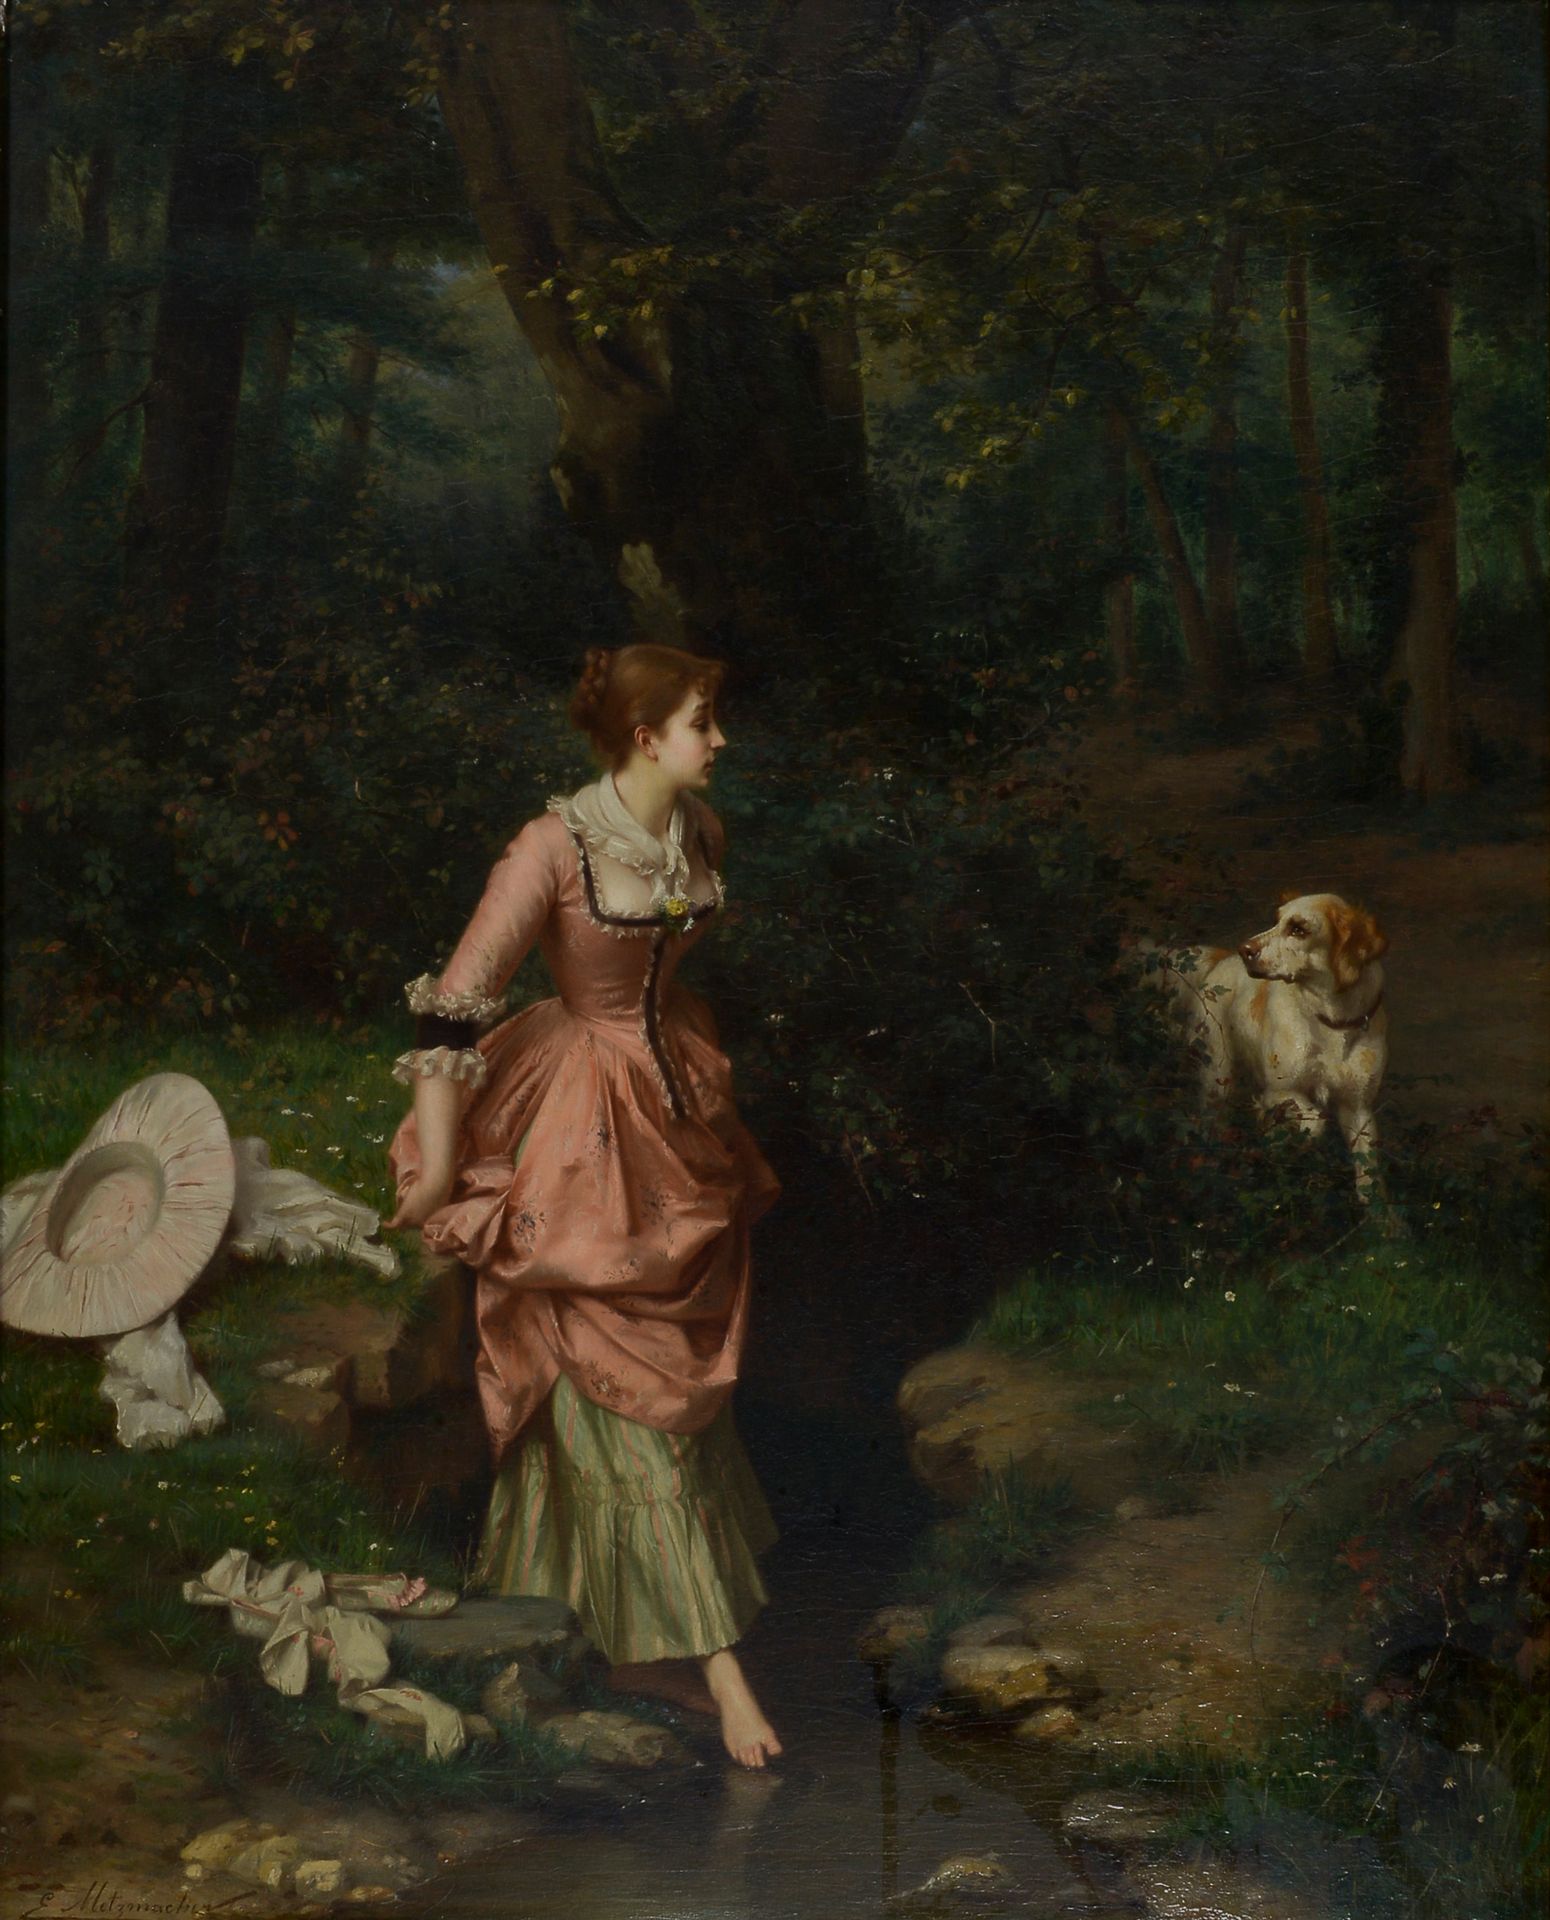 Null Émile METZMACHER (Paris, 1815 - 1890).
Young woman merchant in a stream and&hellip;